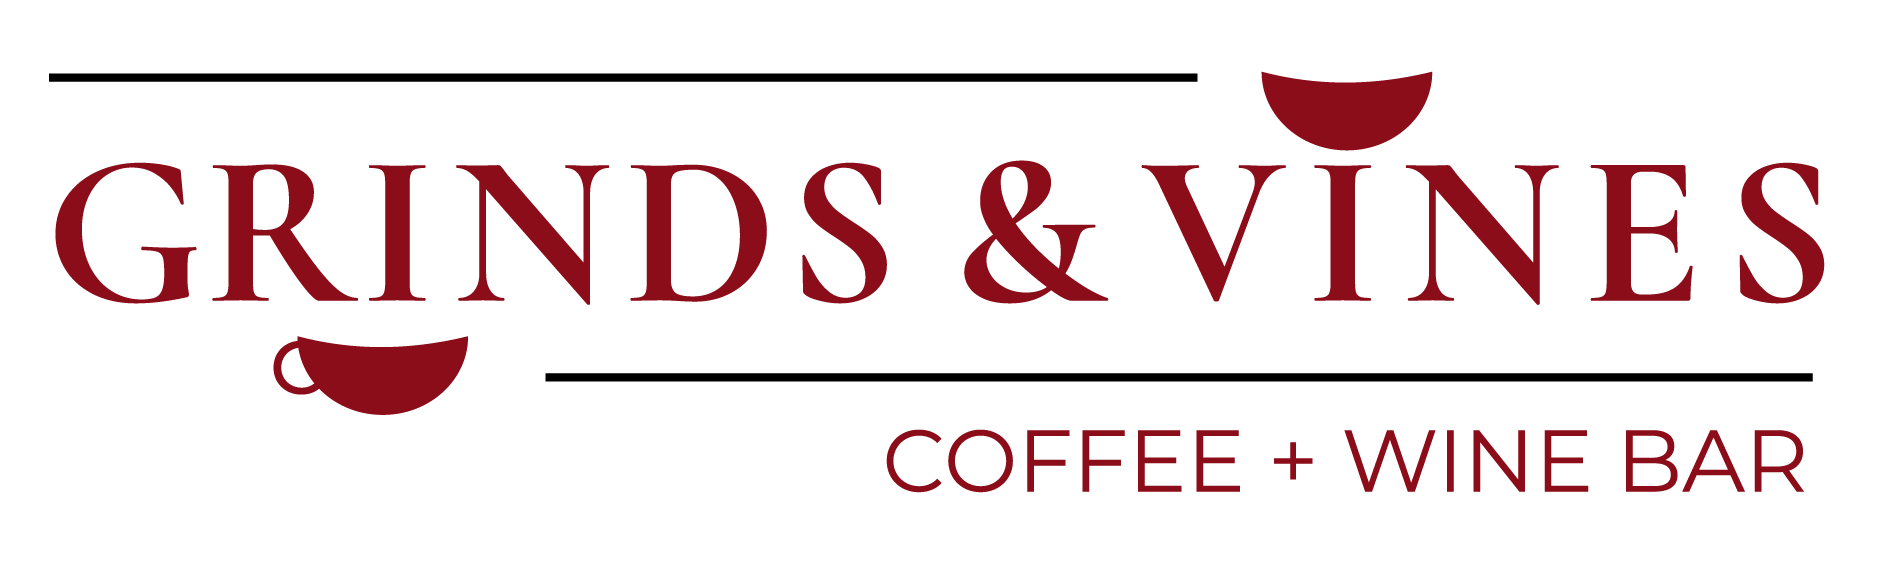 Grinds & Vines – Grinds & Vines: a Black-owned coffee and wine bar